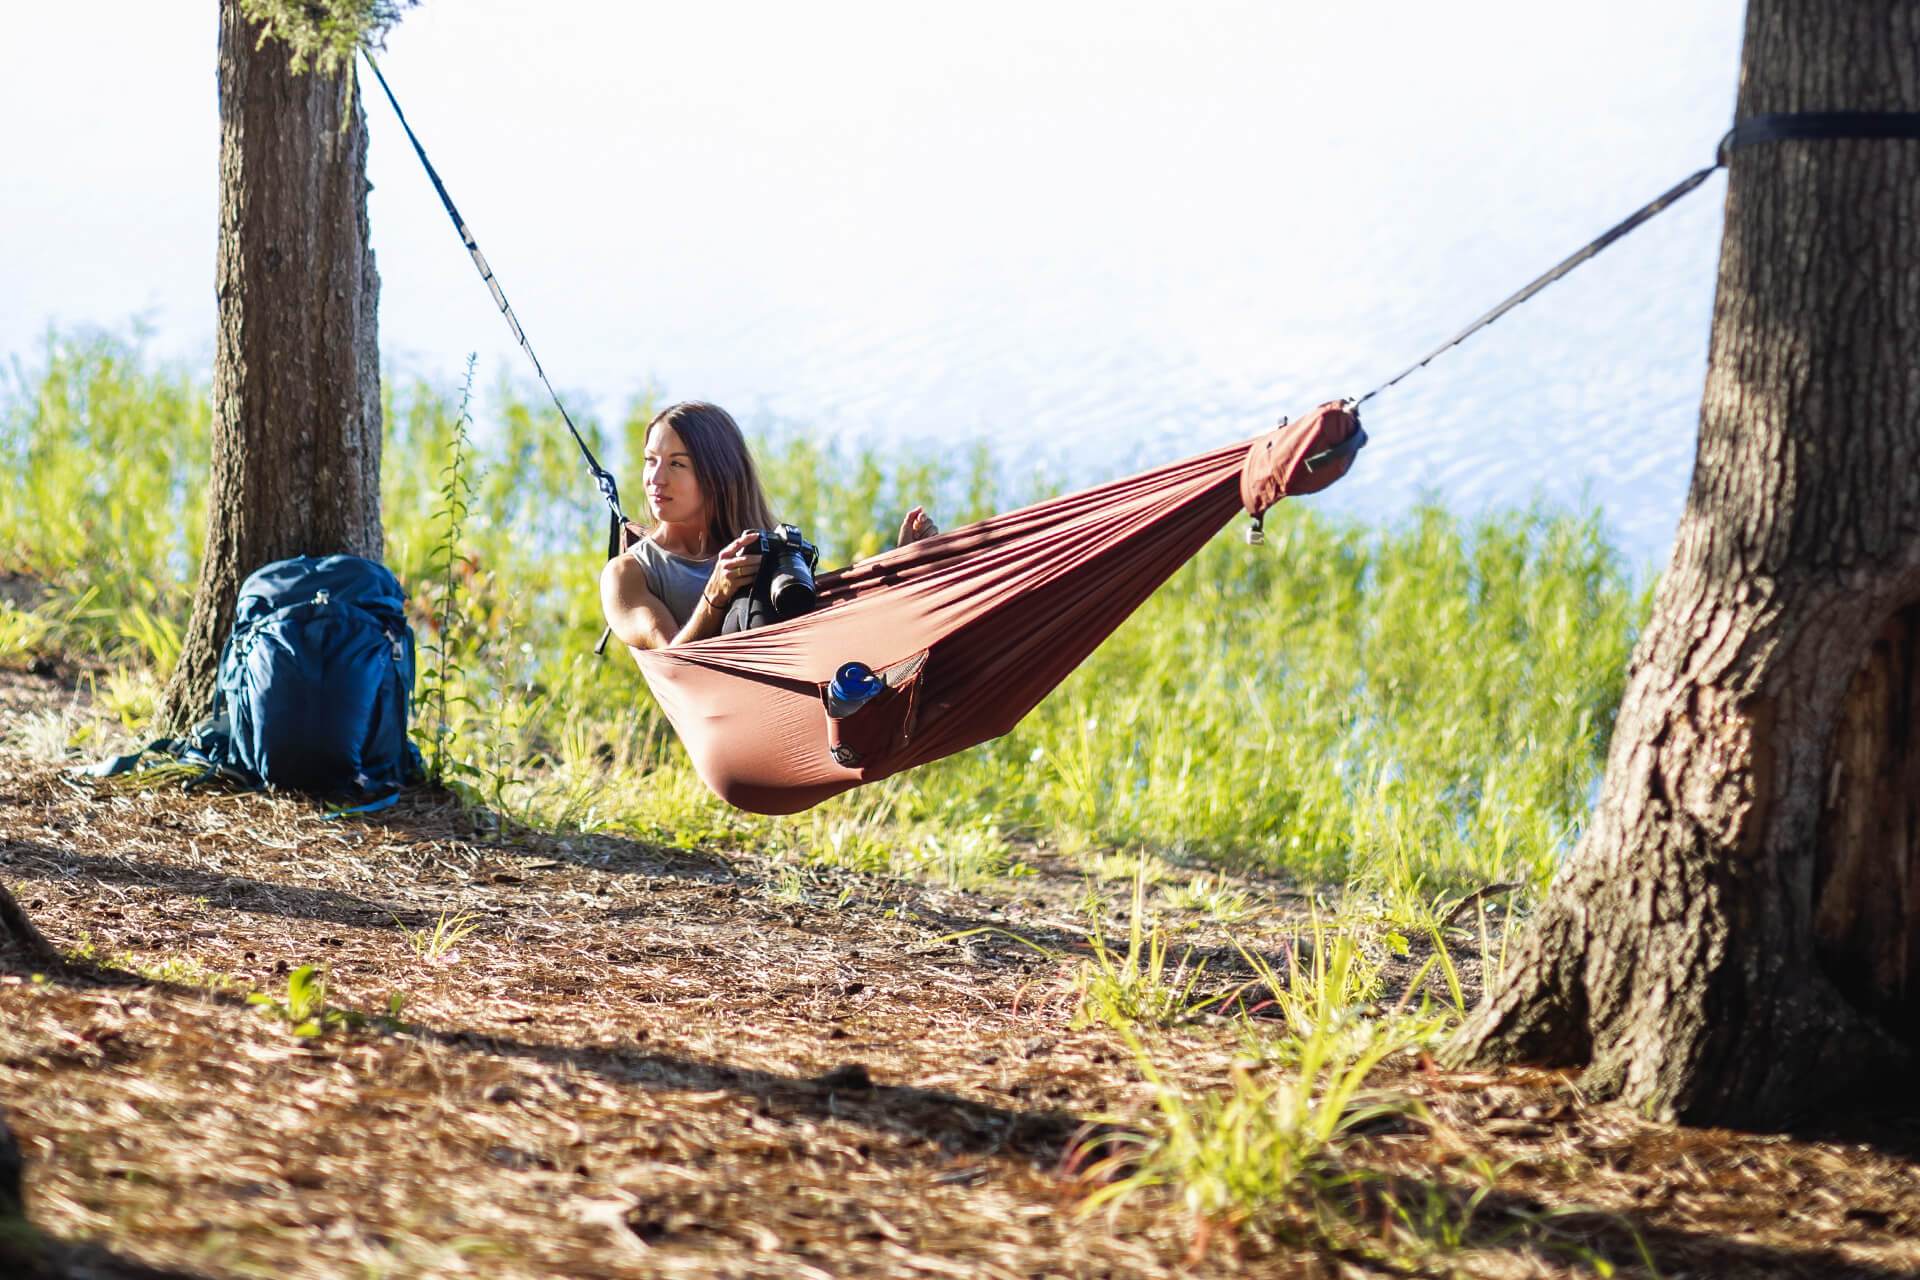 Eagles Nest Outfitters, Inc. Hammock, ENO TechNest Hammock